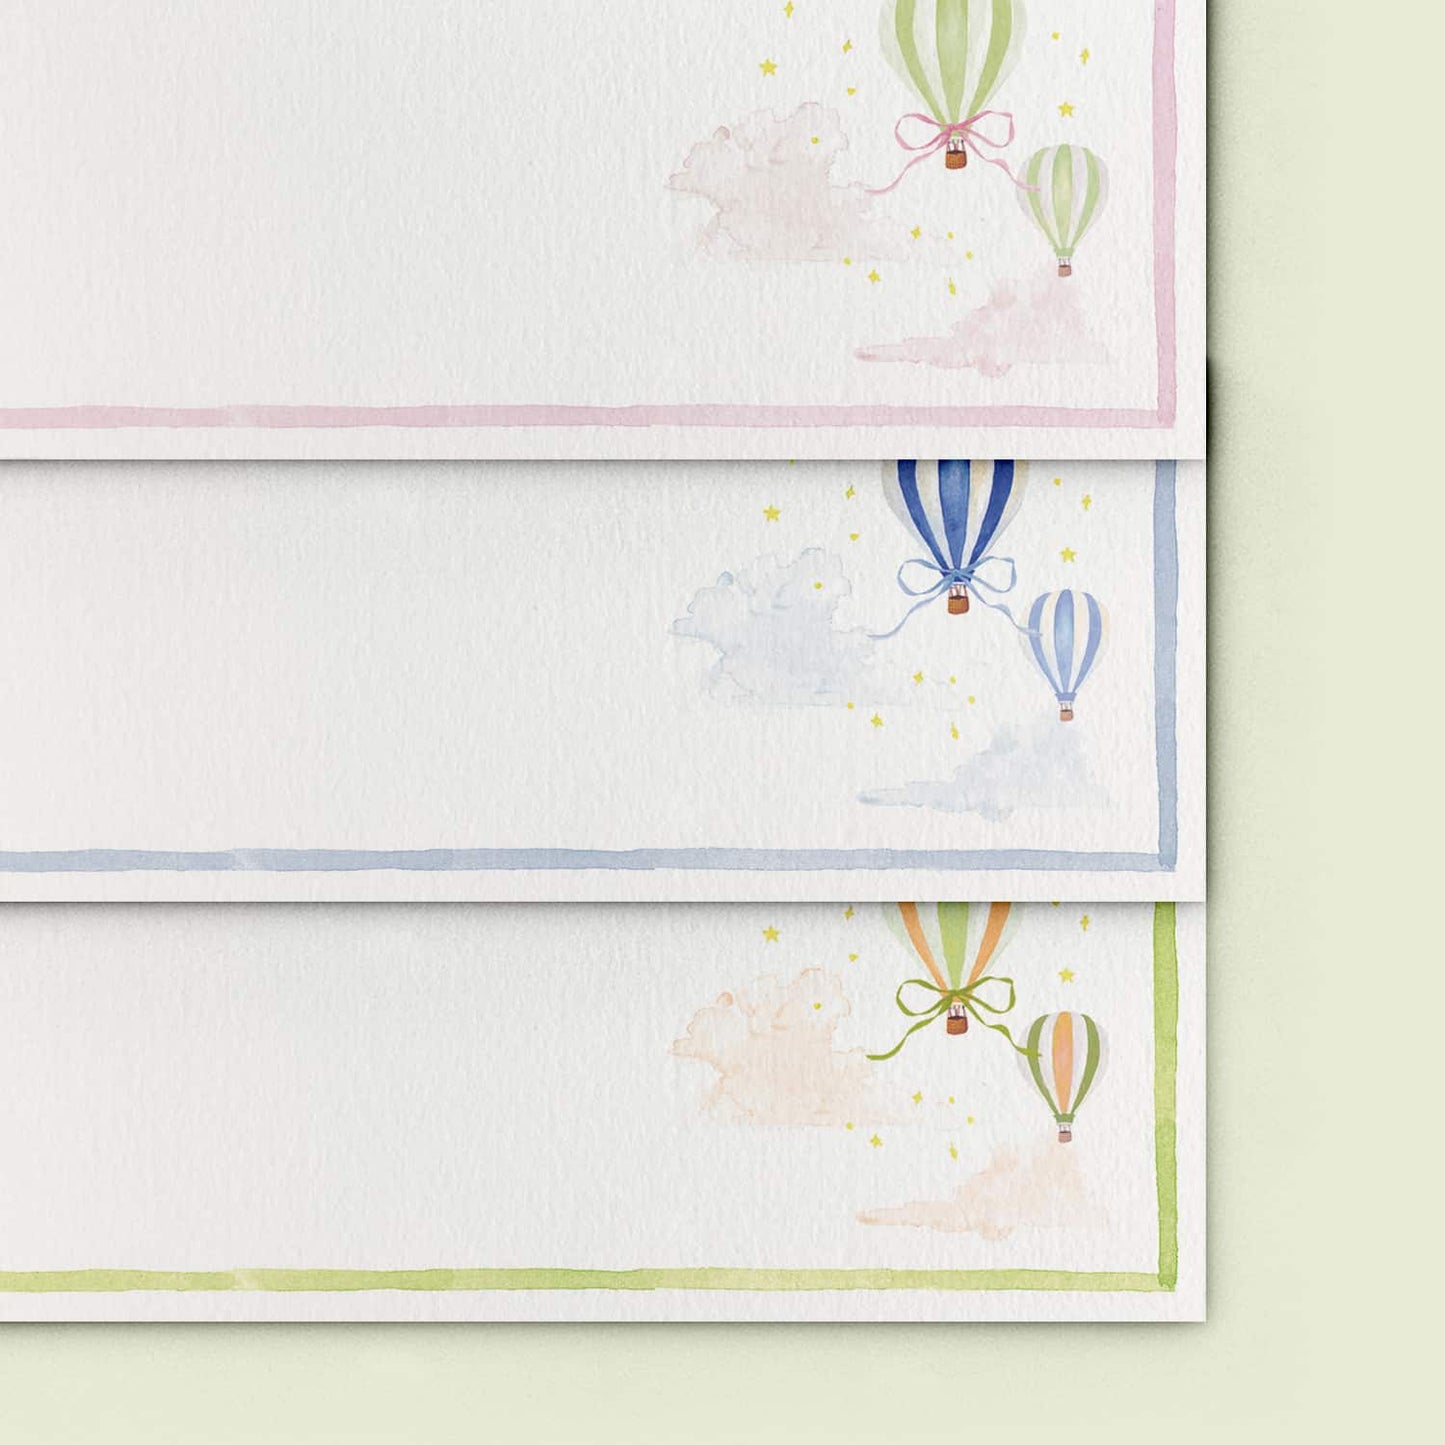 Hot Air Balloons Stationery Cards - 02